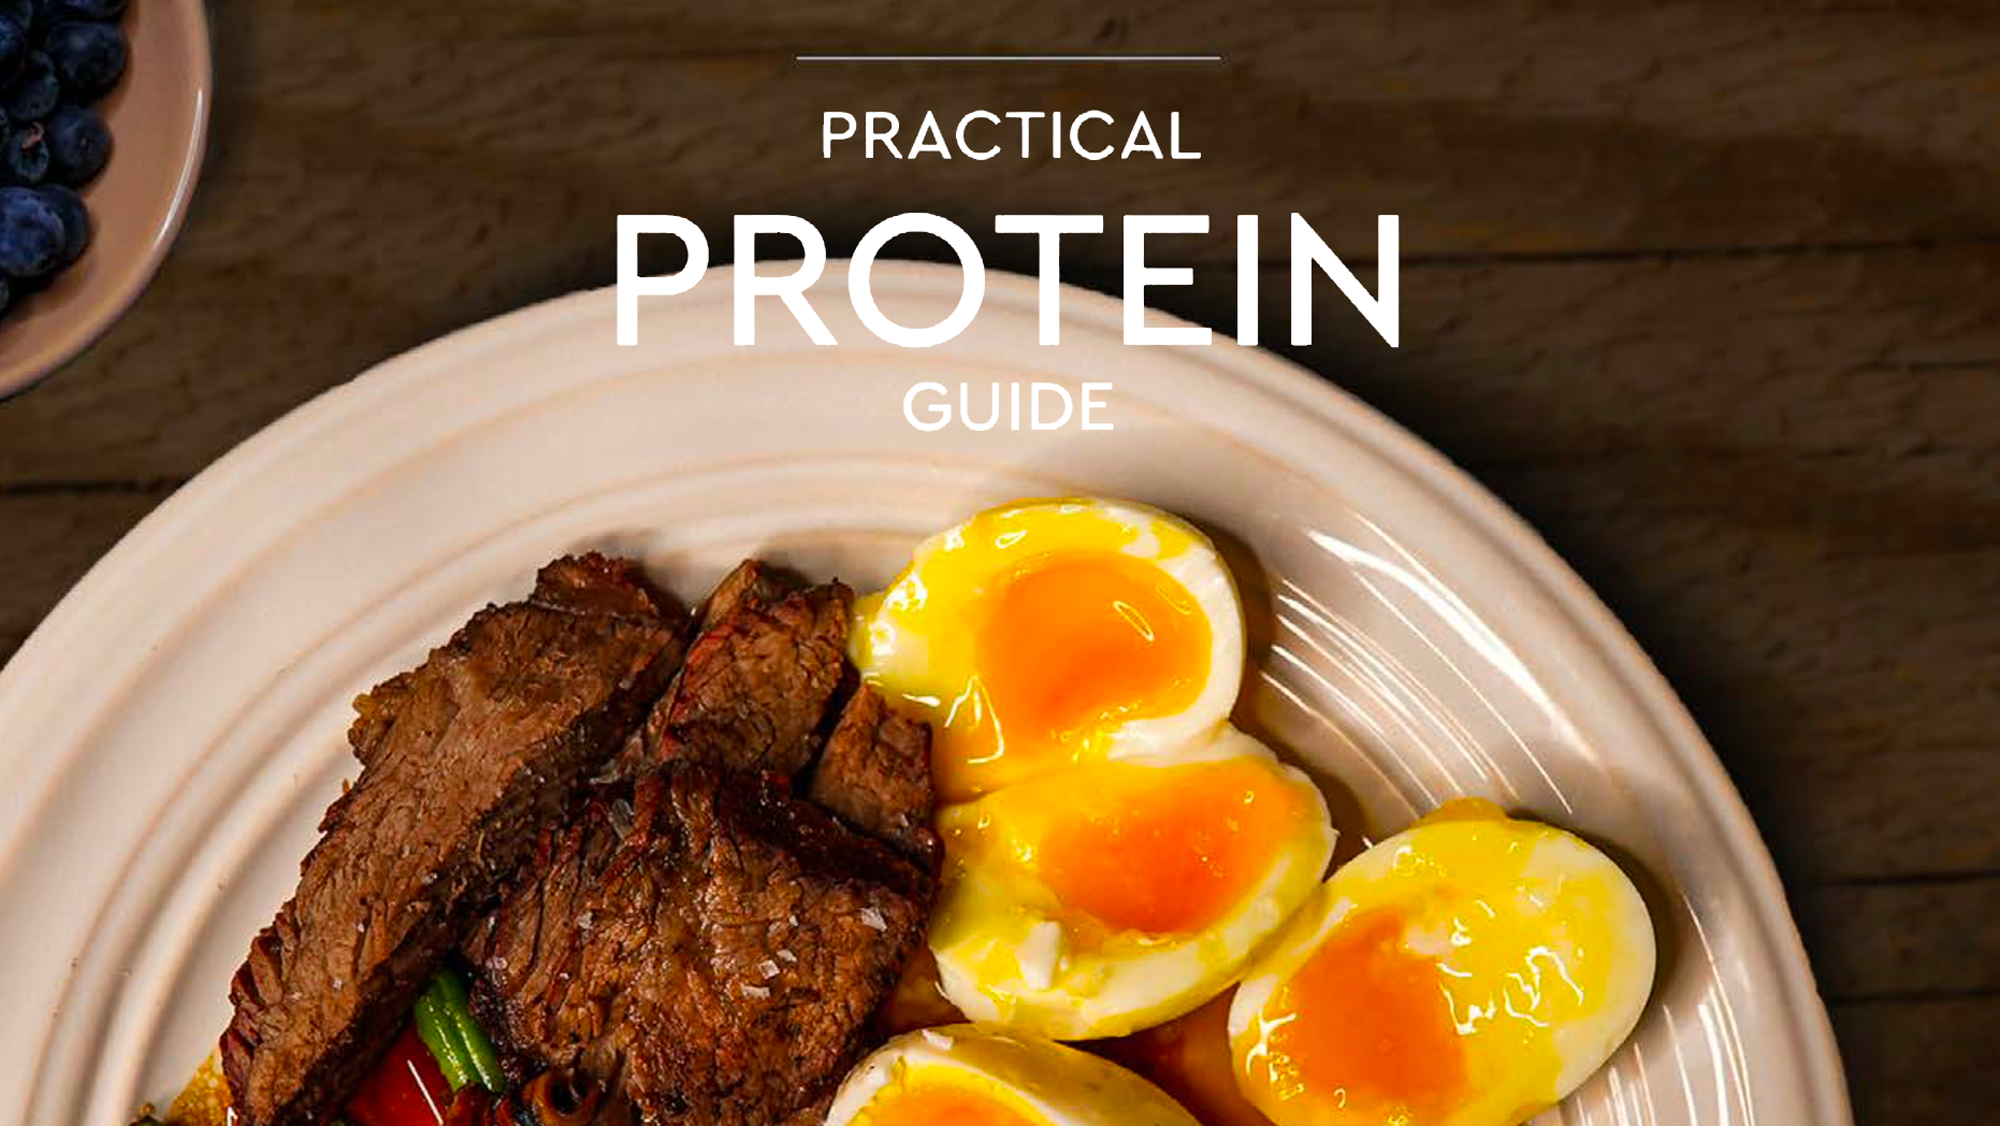 Functional Bodybuilding - Practical Protein Guide